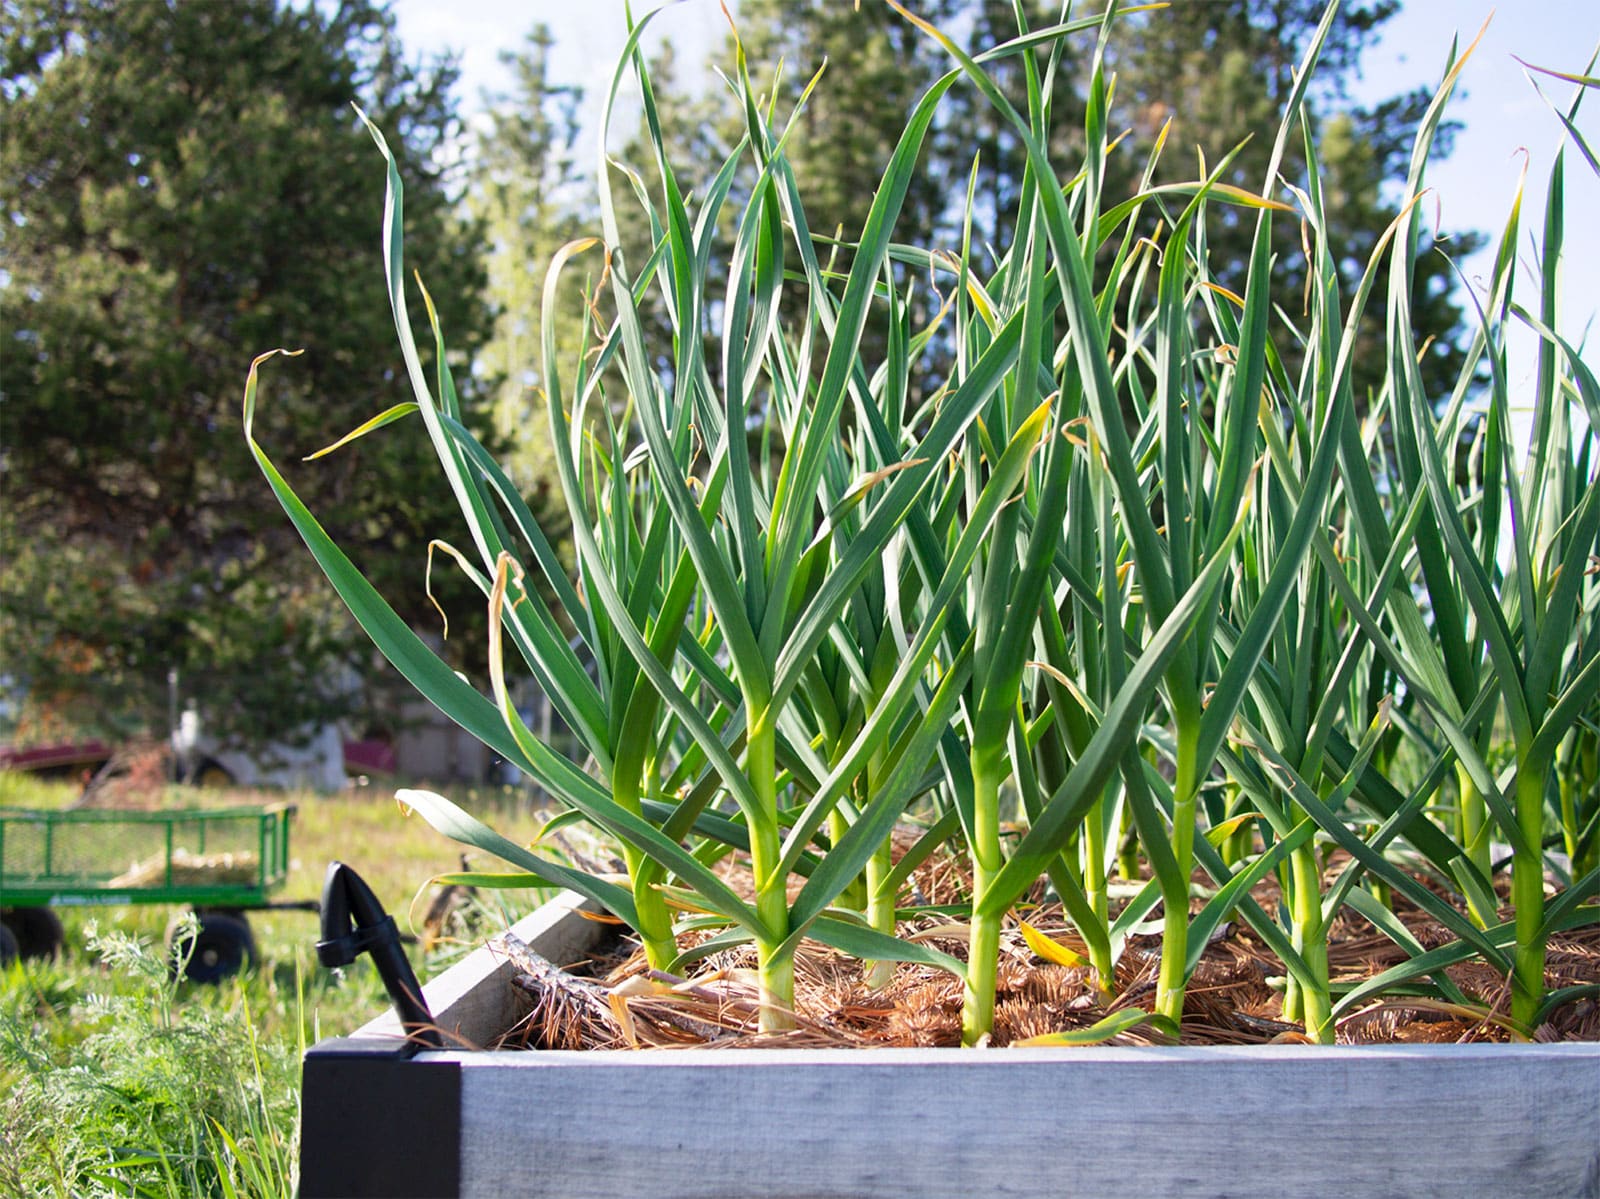 Garlic plants growing in a raised bed